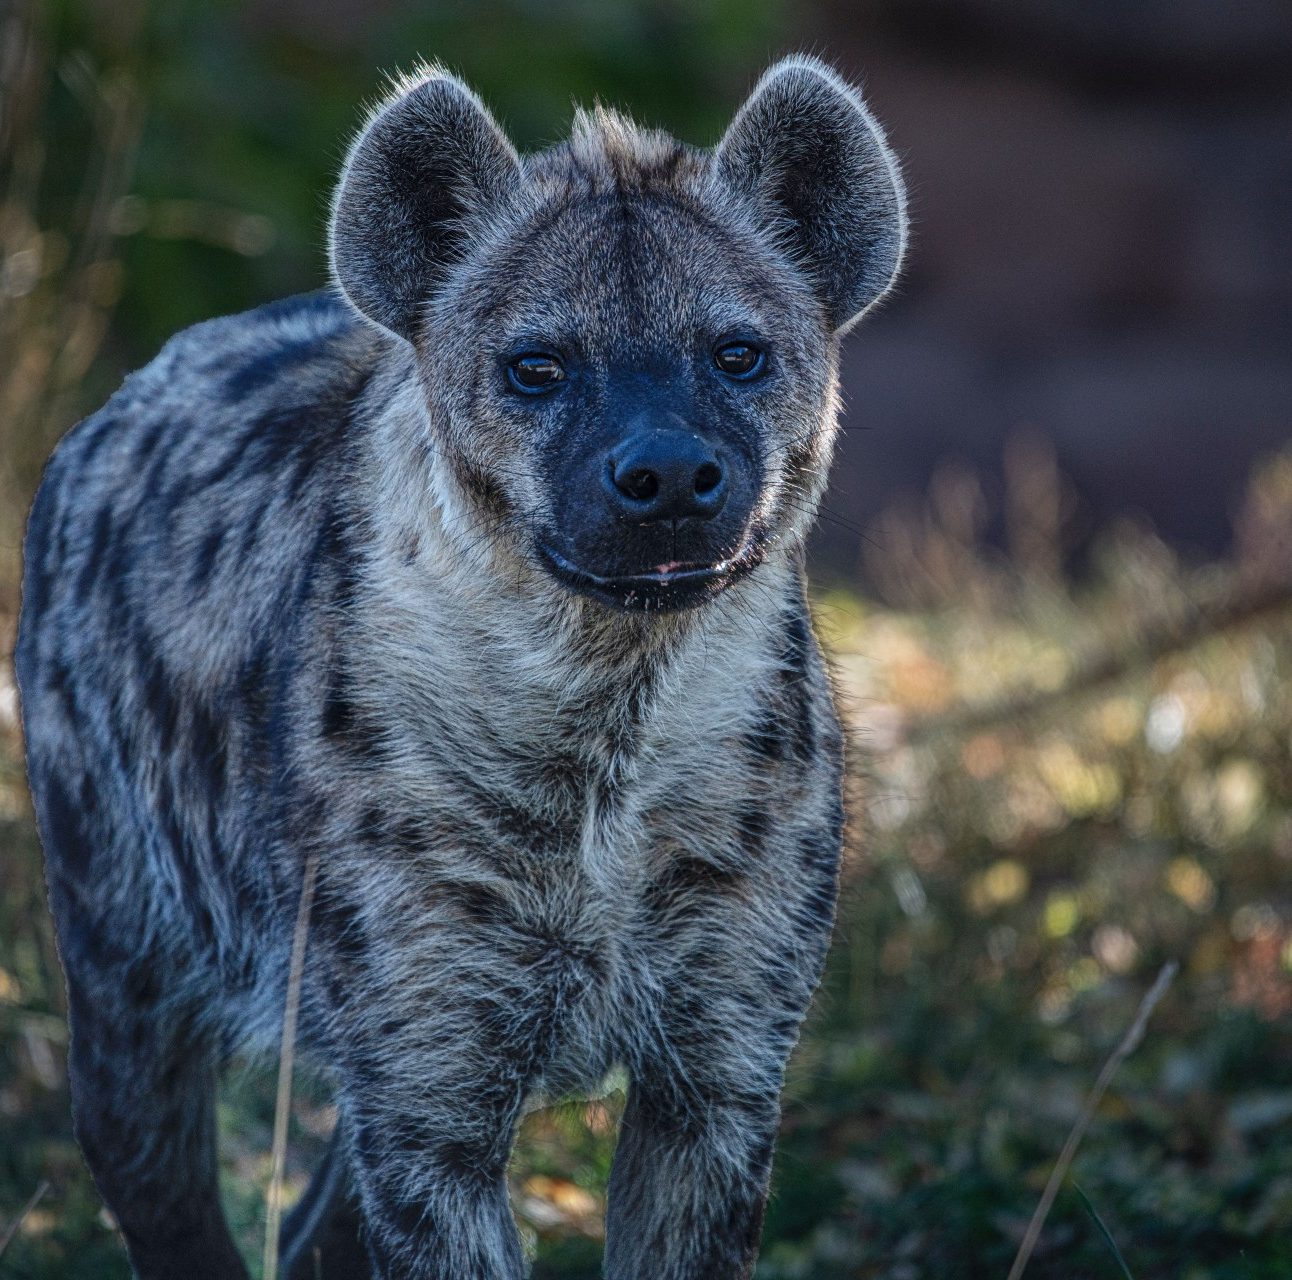 A portrait of a hyena standing in shrubland